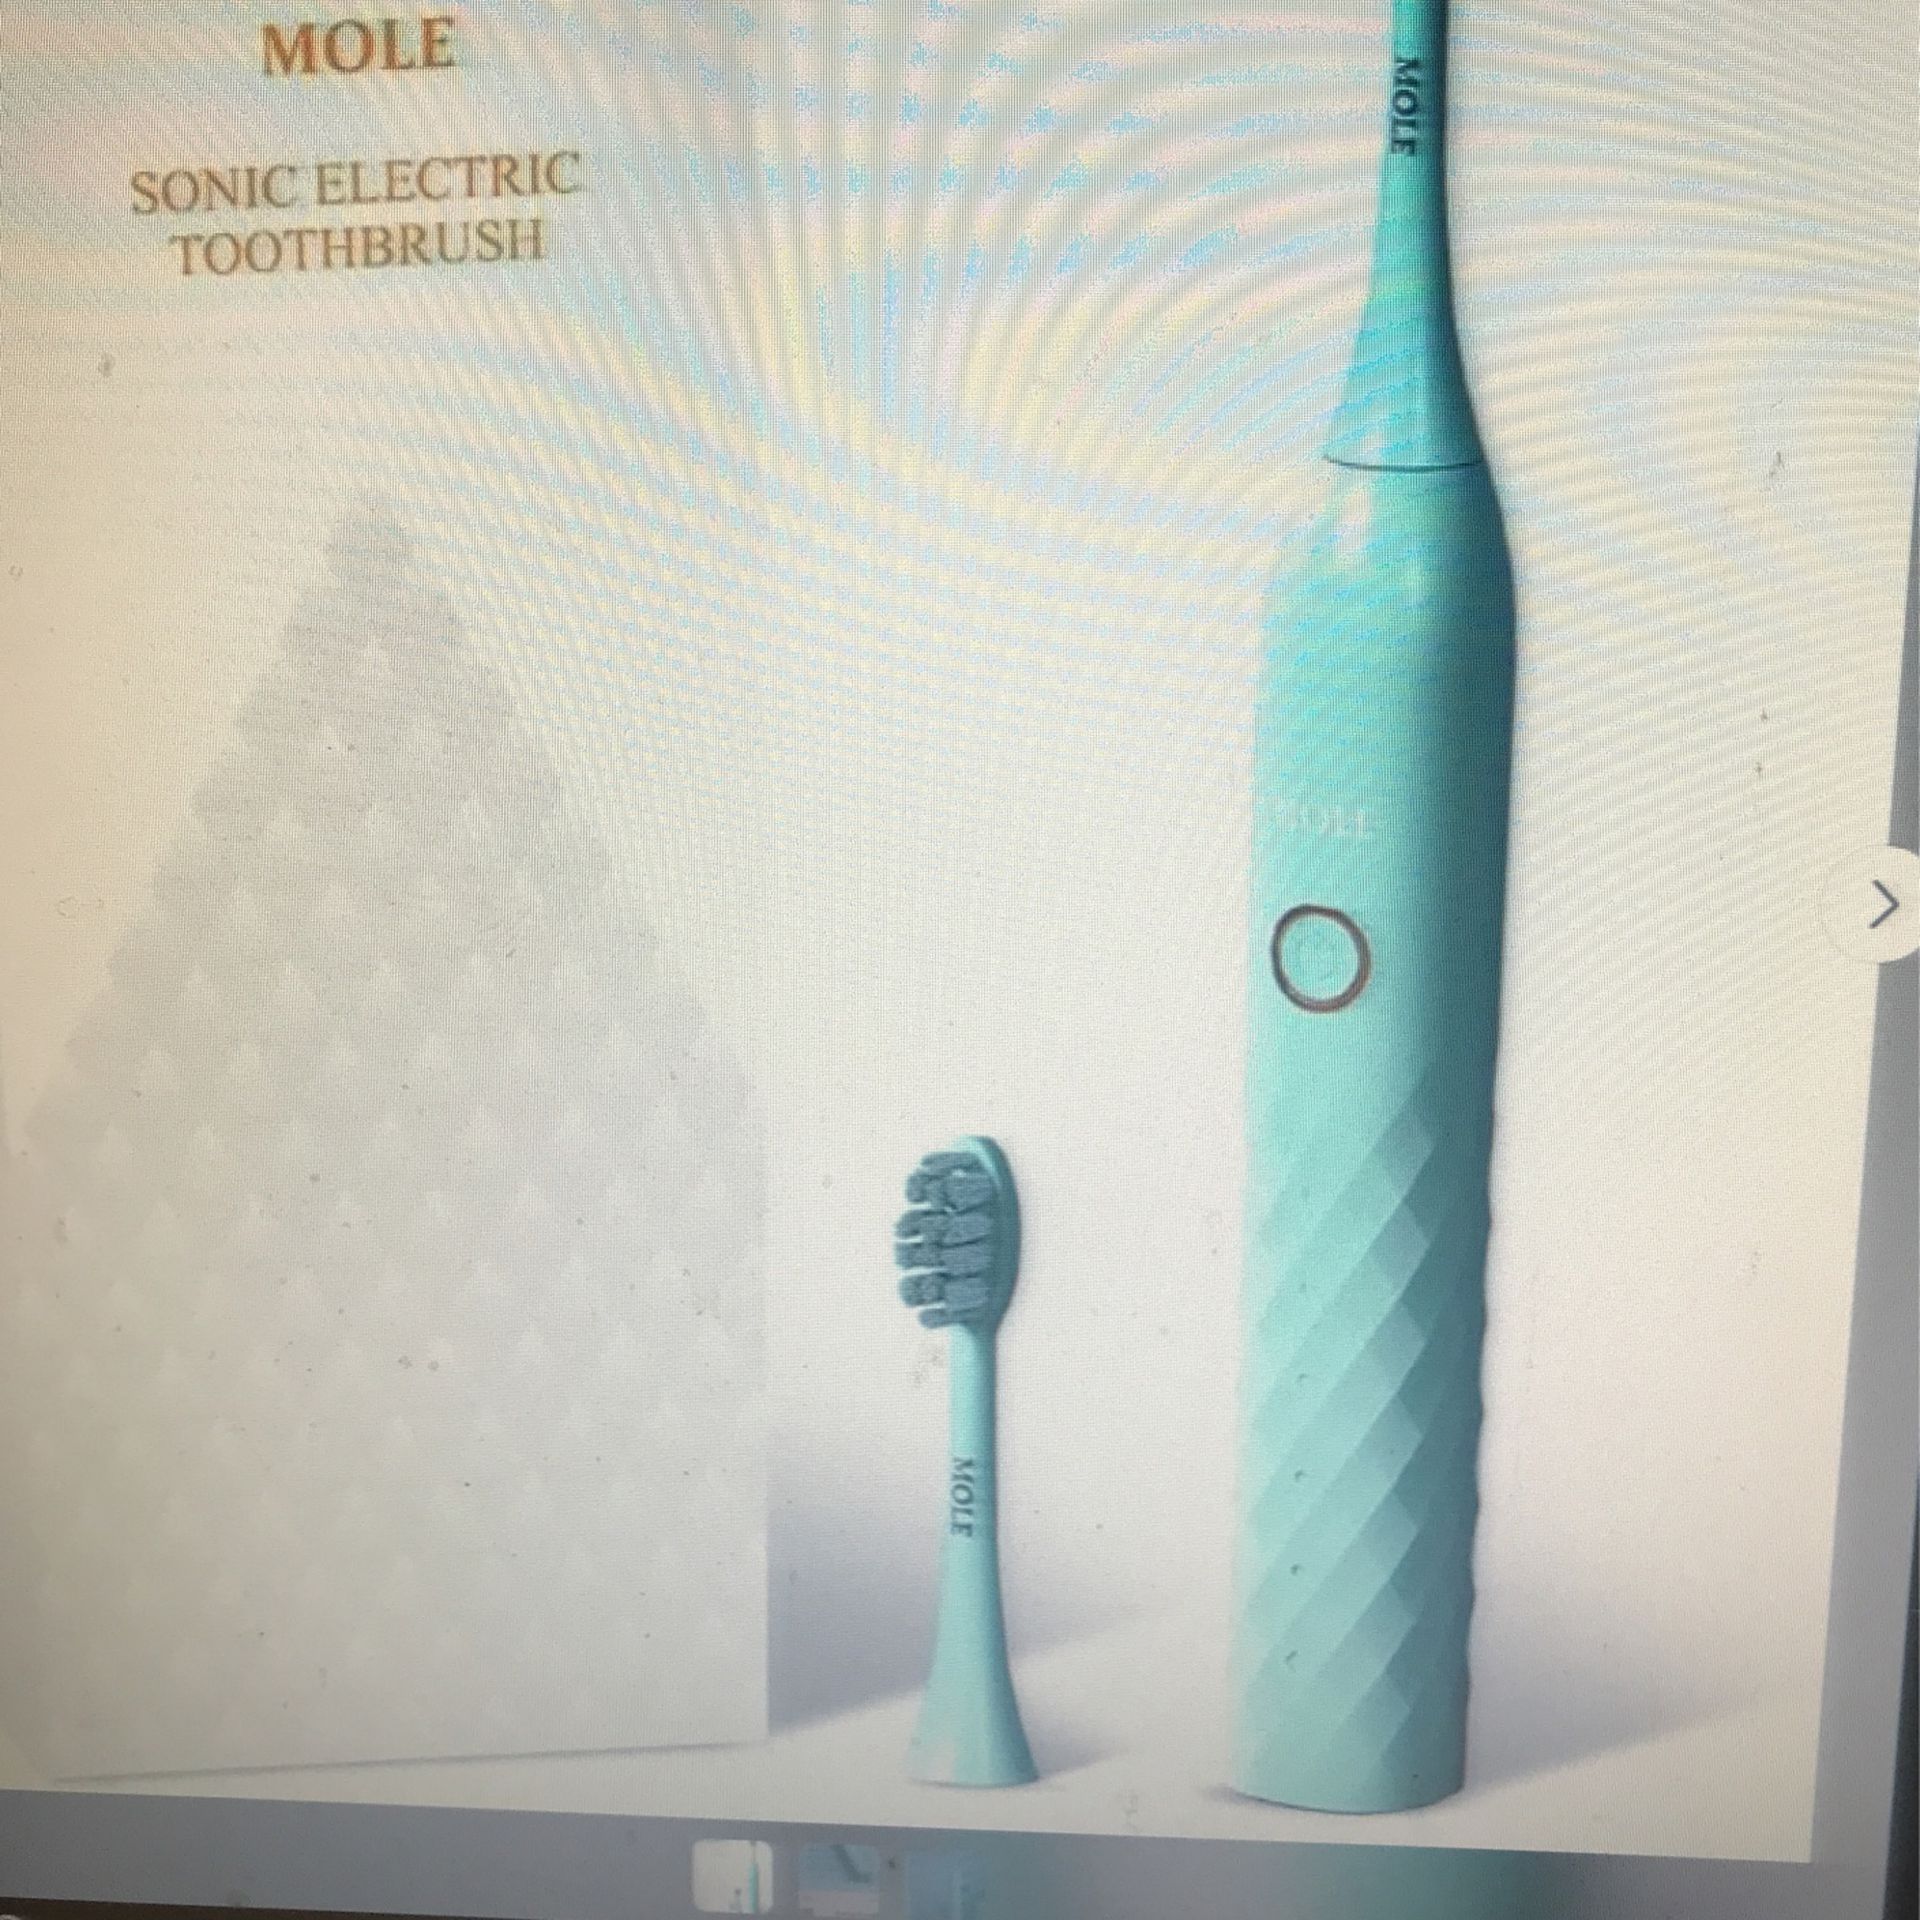 Mole Diamond Sonic Electric Toothbrush L7 Tiffany Blue with Replacement Head